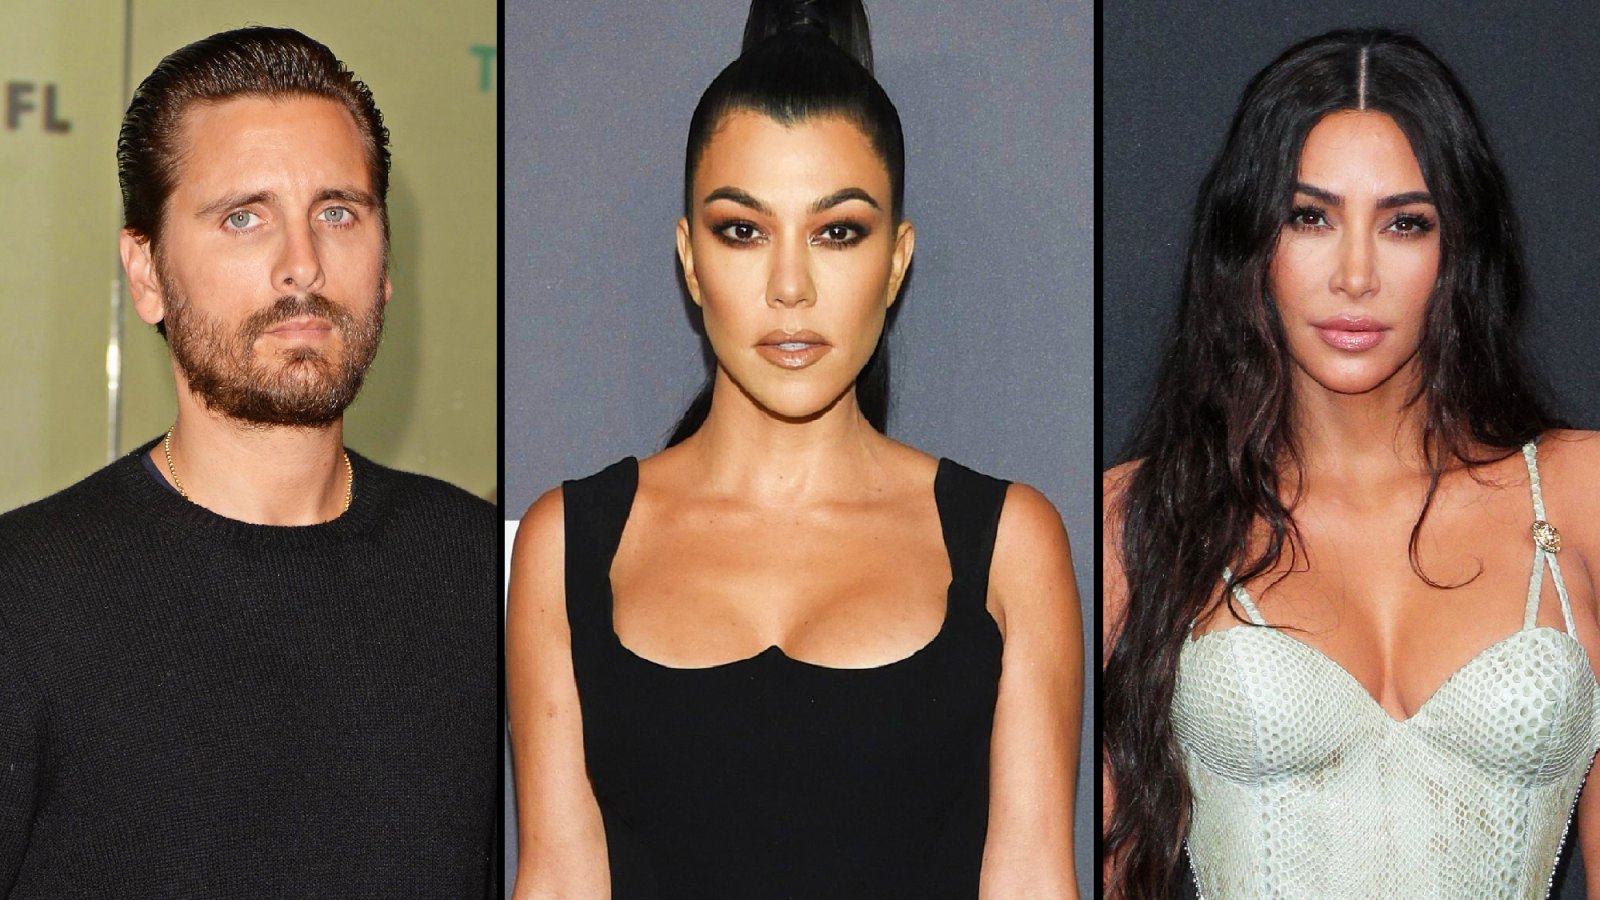 Scott Disick Worries About His Kids After Kourtney and Kim's Fight on 'KUWTK'